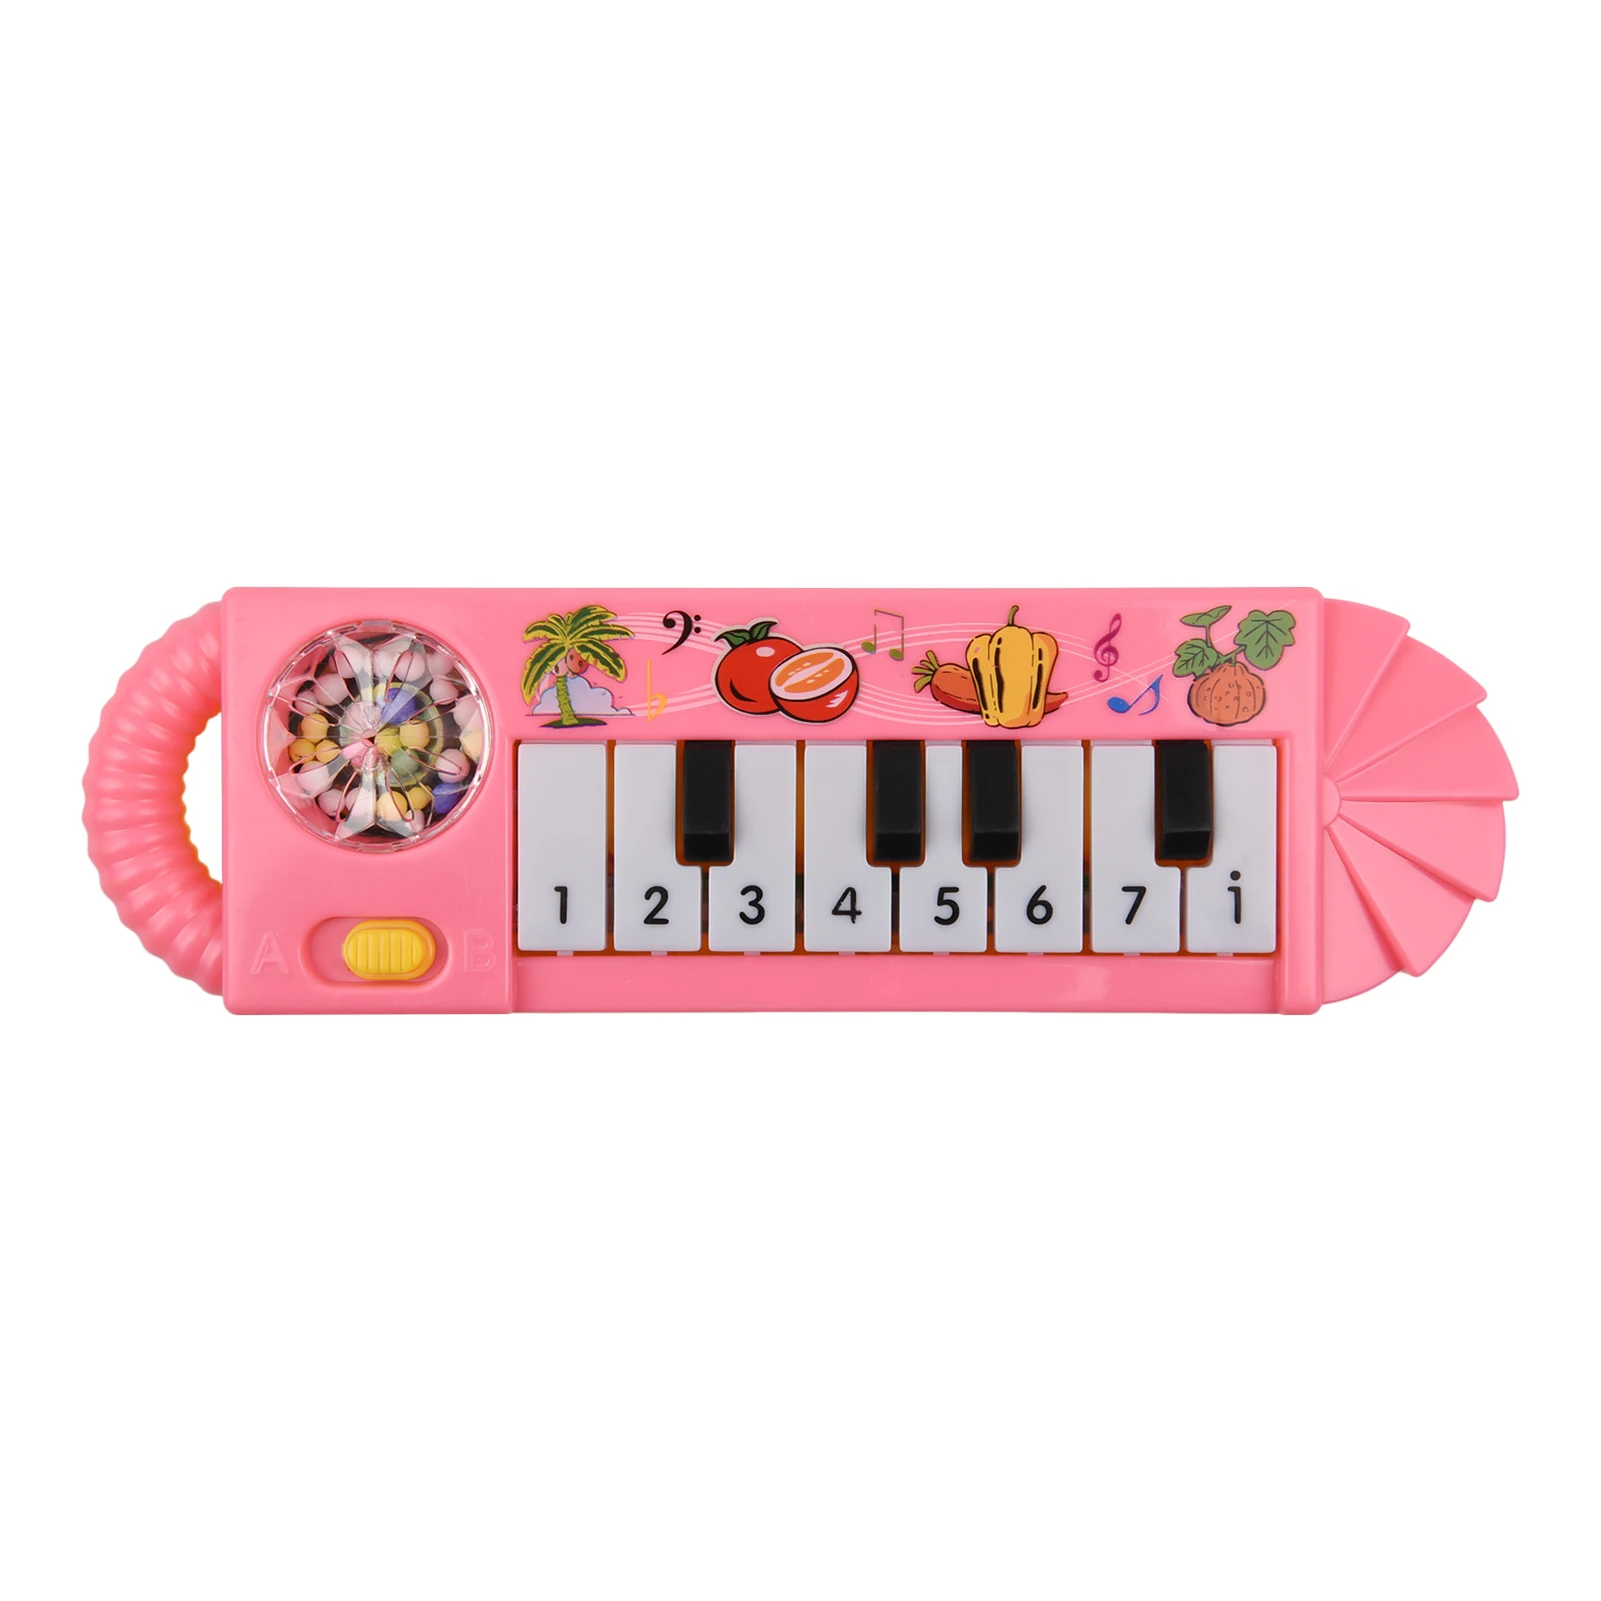 Mini 8 Electronic Piano Toy for Children Early Musical Y4D3 